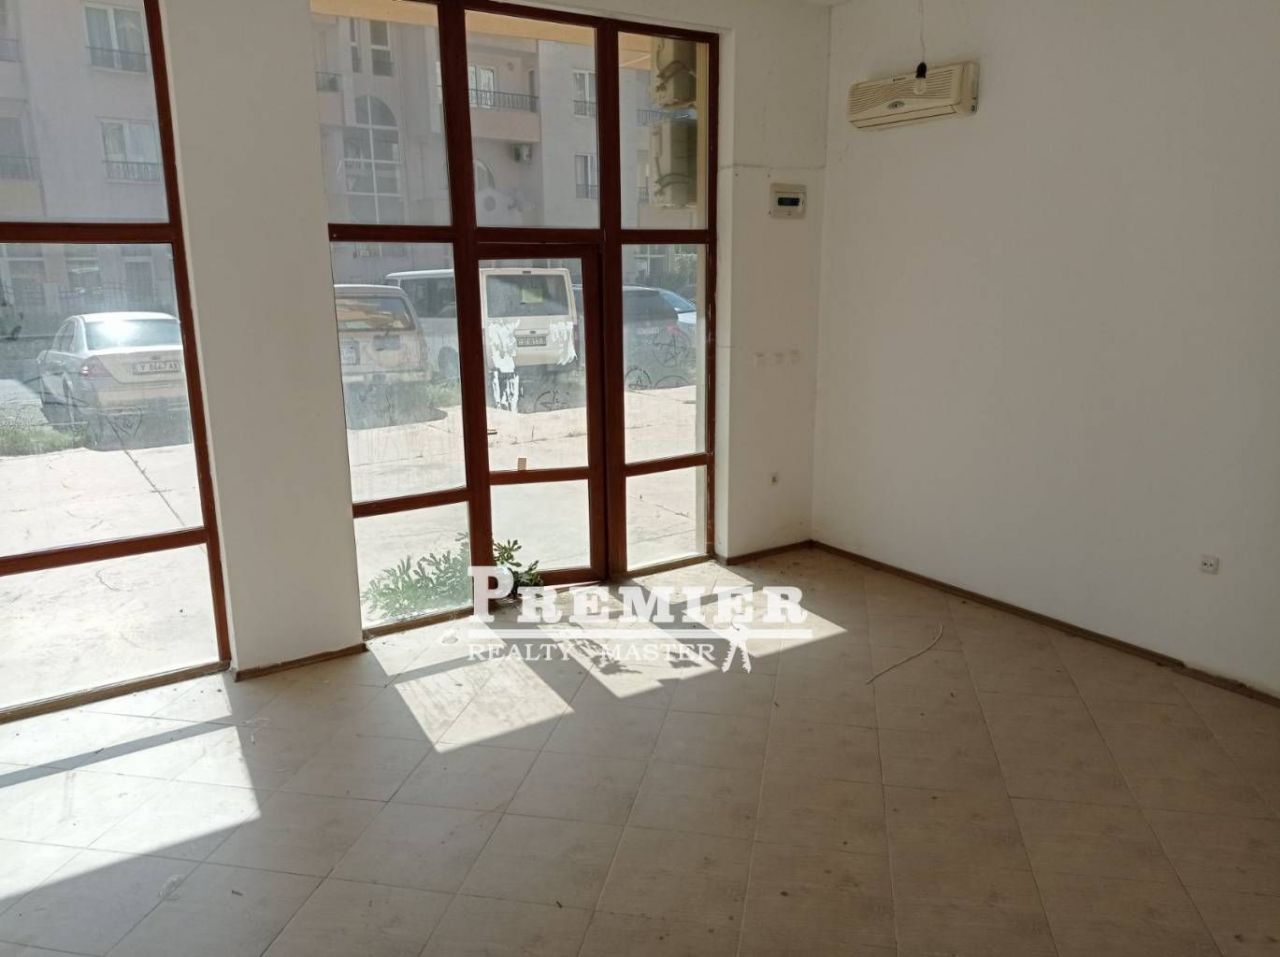 Commercial property at Sunny Beach, Bulgaria, 51.41 sq.m - picture 1